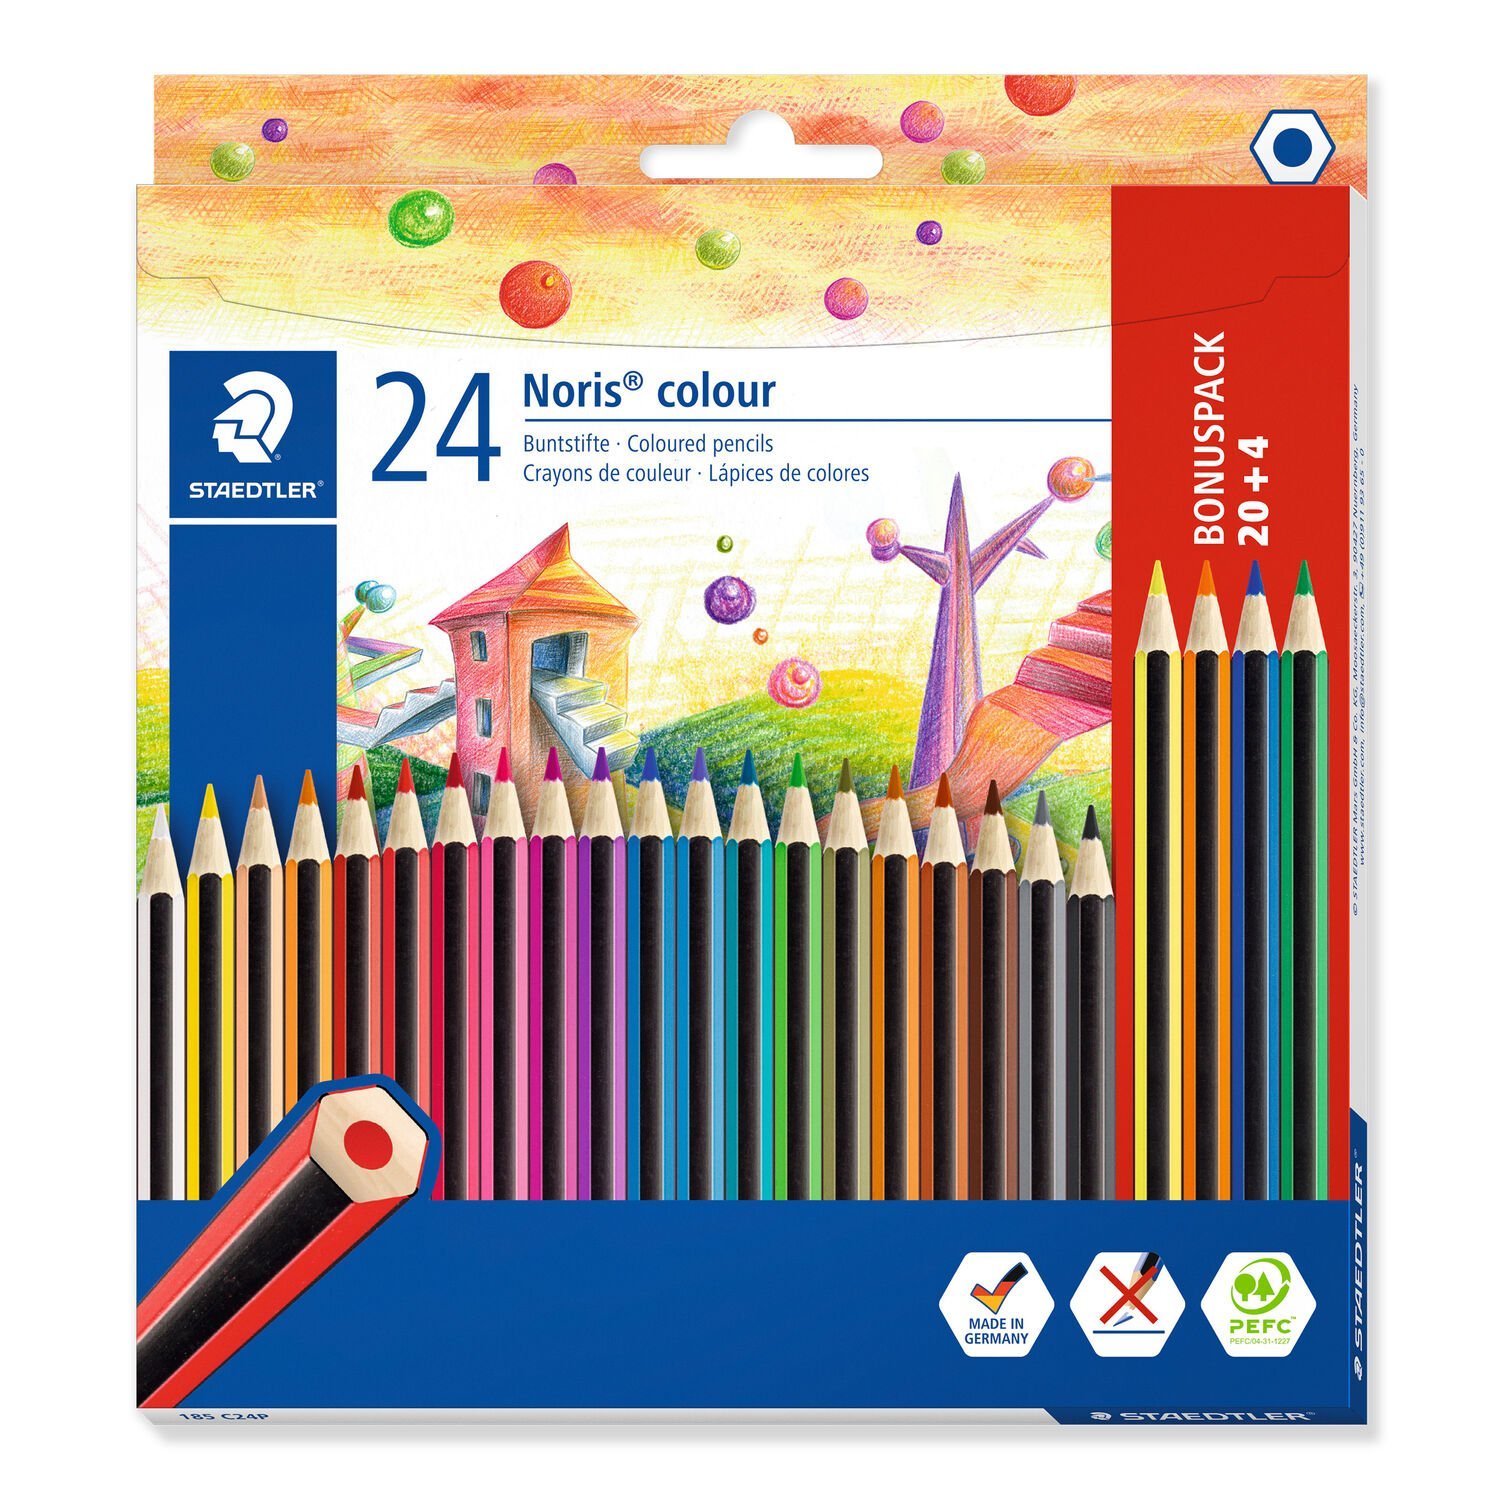 Cardboard box containing 24 coloured pencils in assorted colours